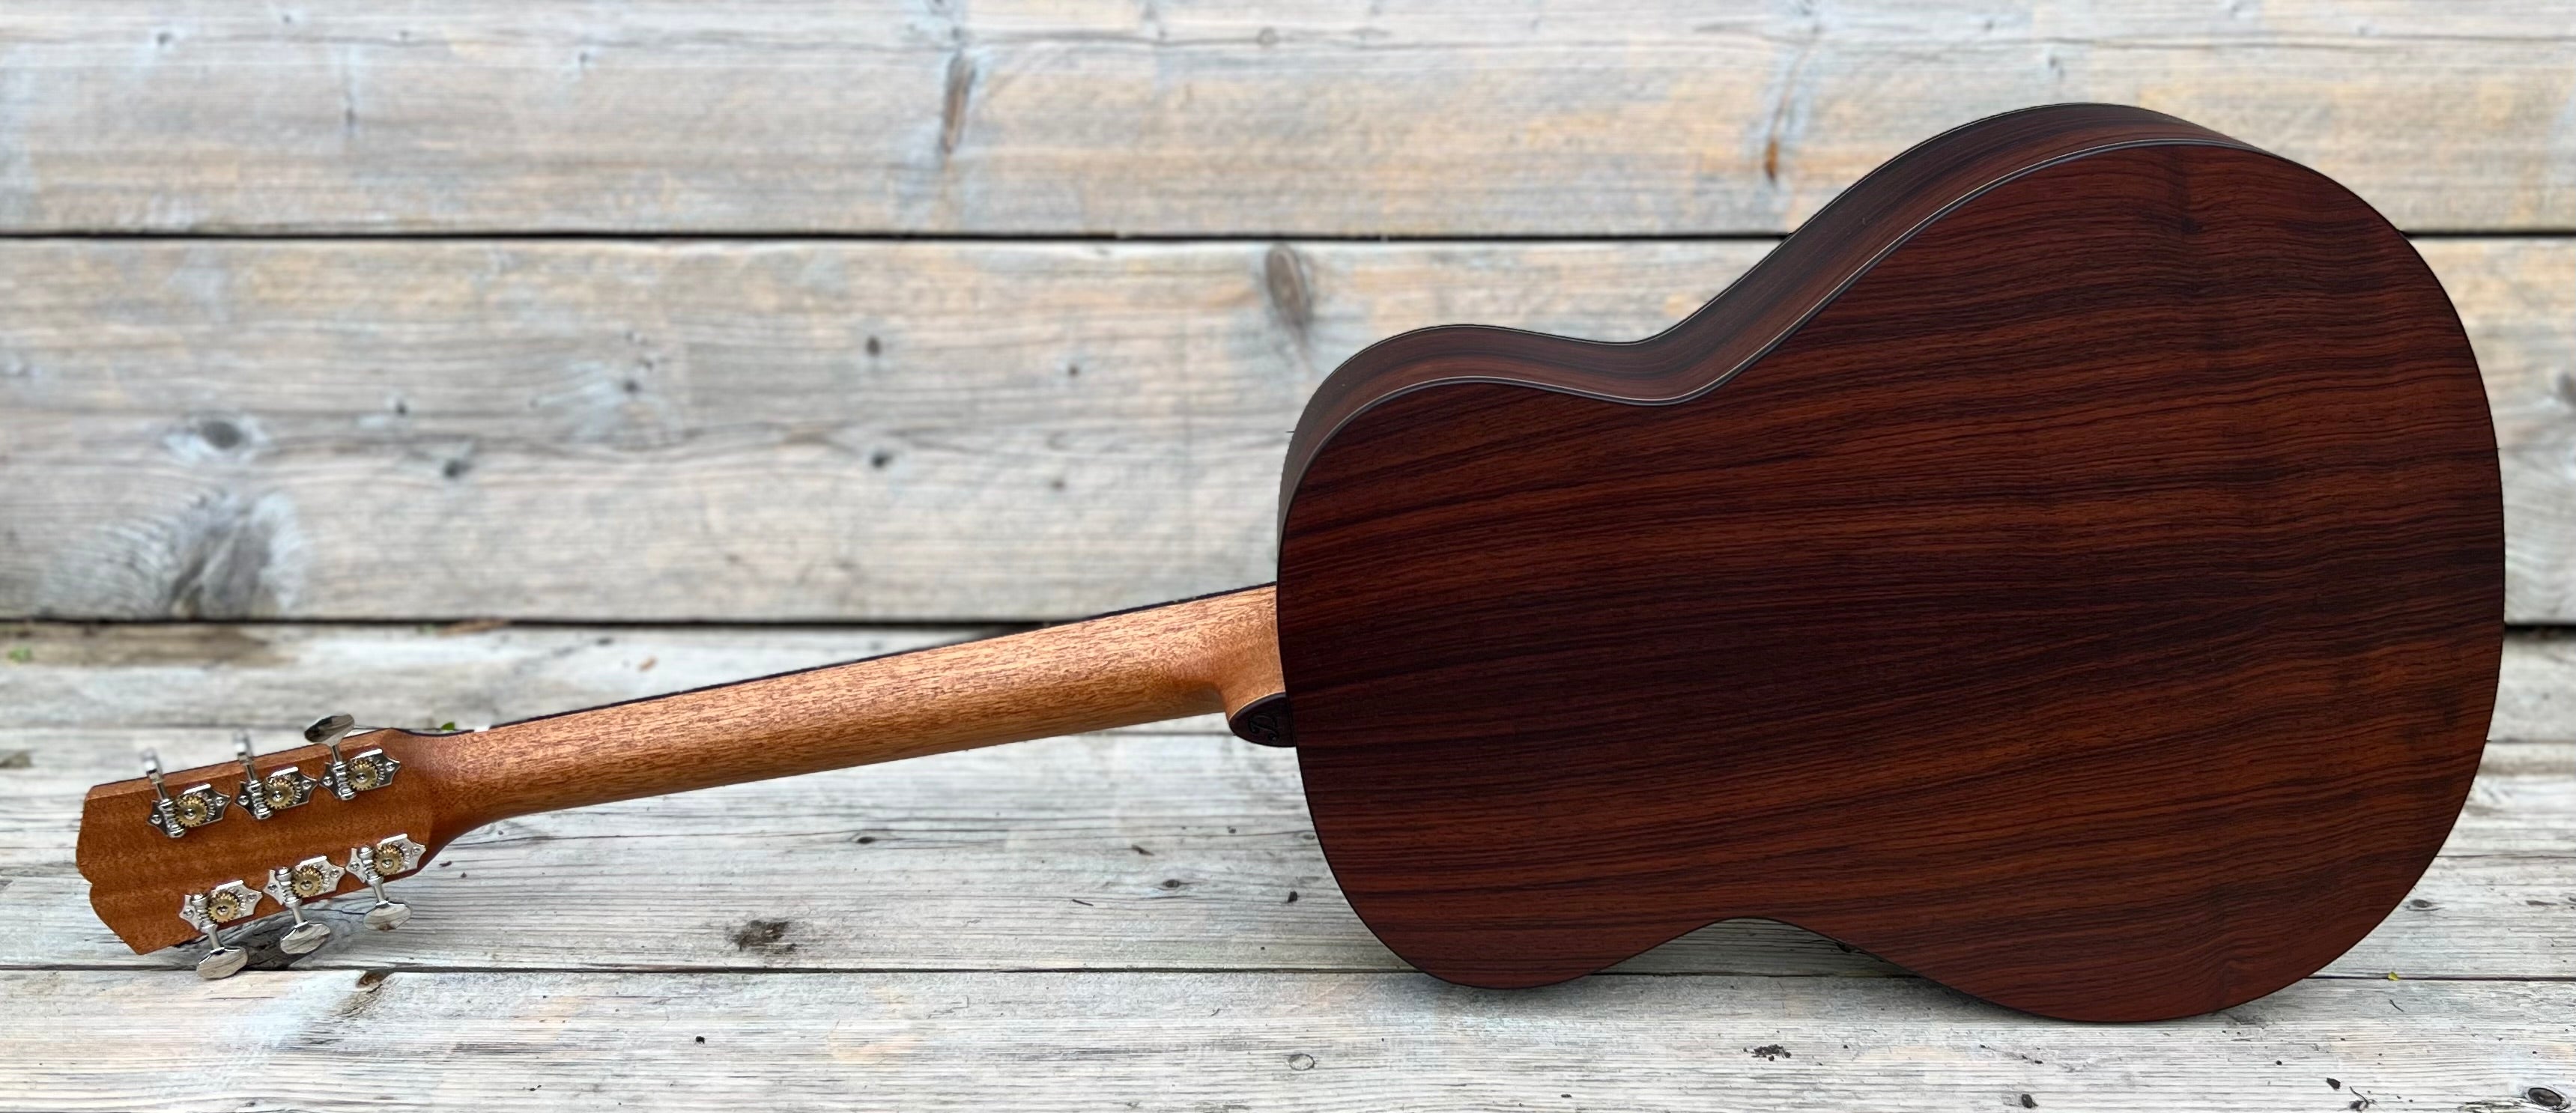 Dowina Rosewood OMG.  OM Body Acoustic Guitar, Acoustic Guitar for sale at Richards Guitars.